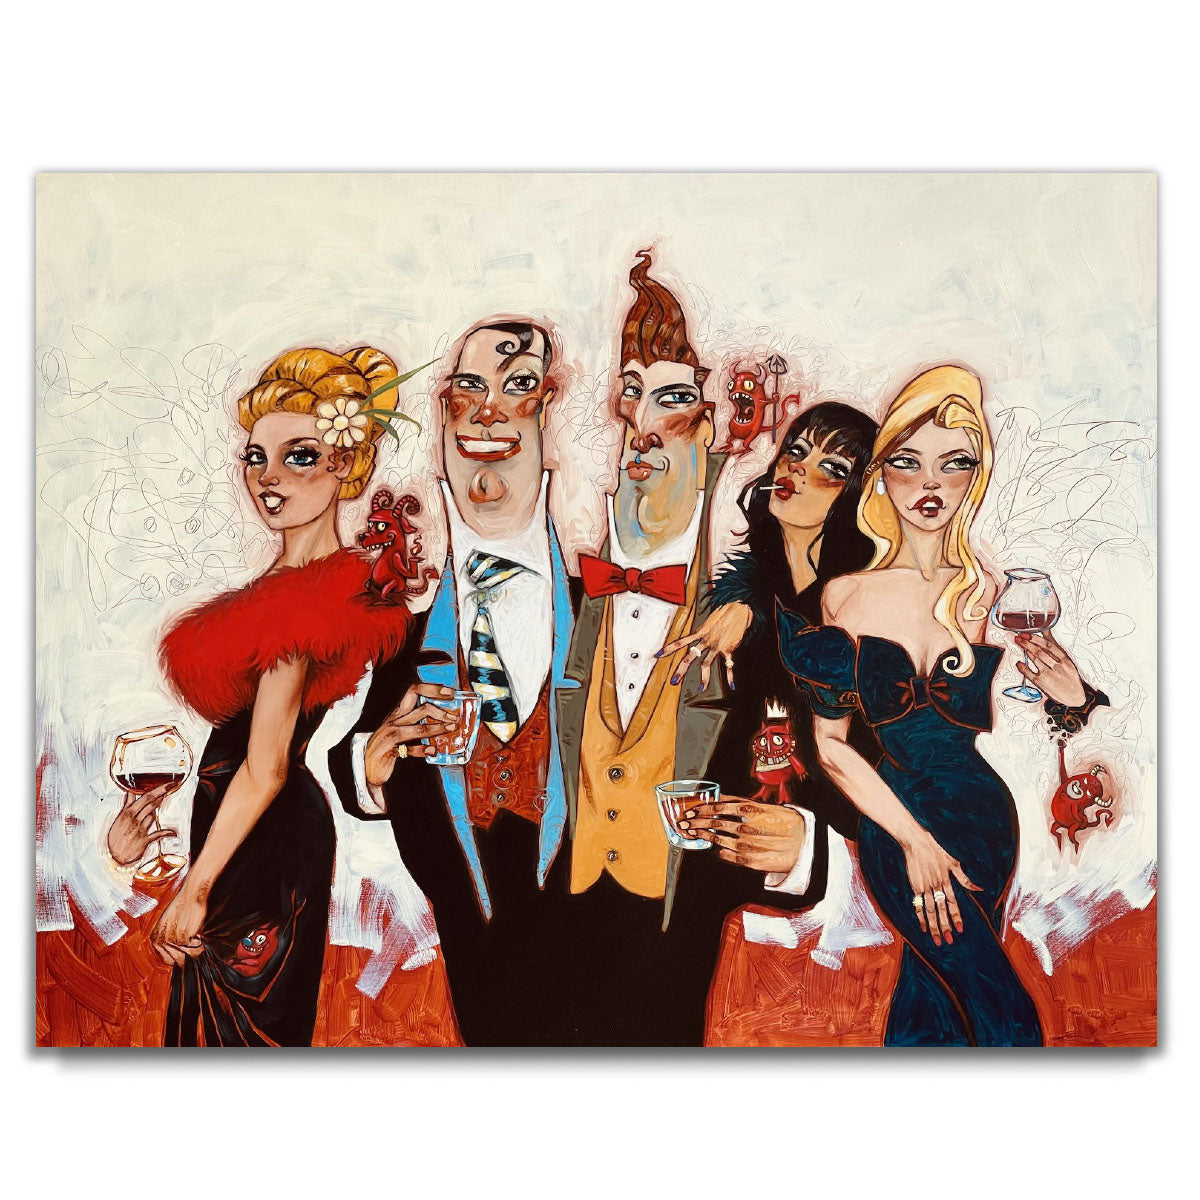 Todd White "Same Hell Different Devils" Limited Edition Canvas Giclee